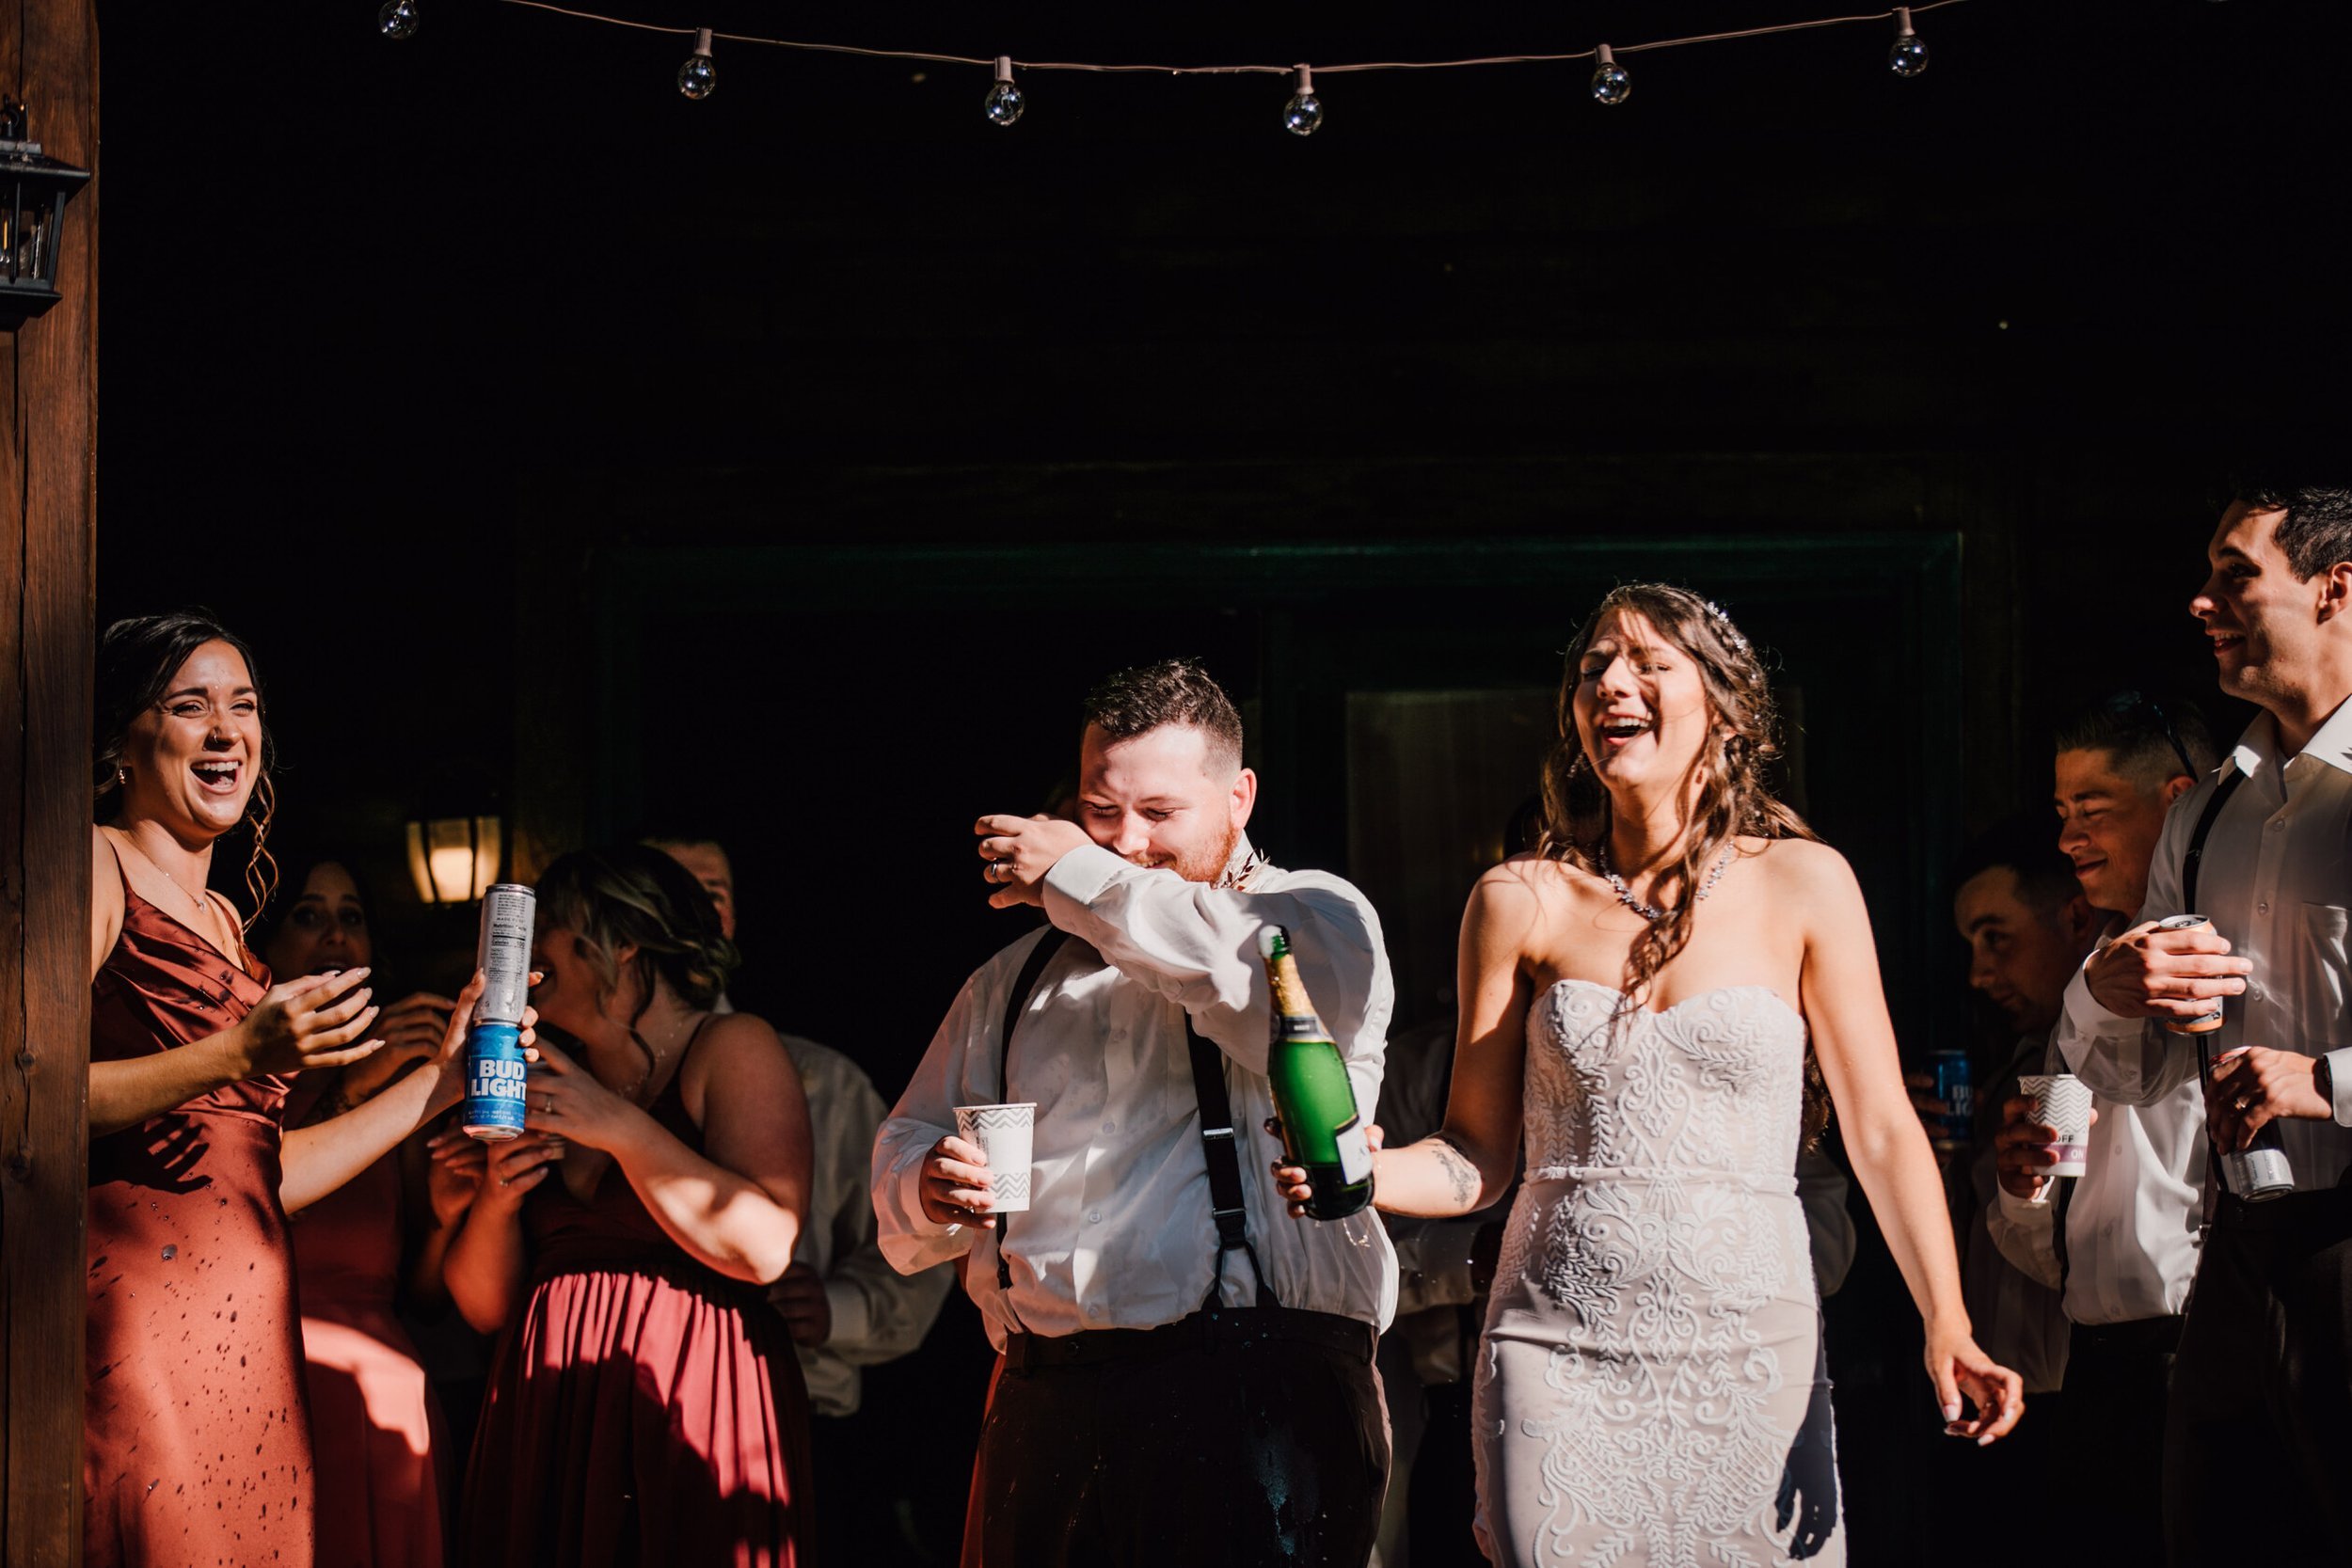  The bride, groom, and wedding party laugh after the bride popped a bottle of champagne after their rustic wedding ceremony&nbsp; 